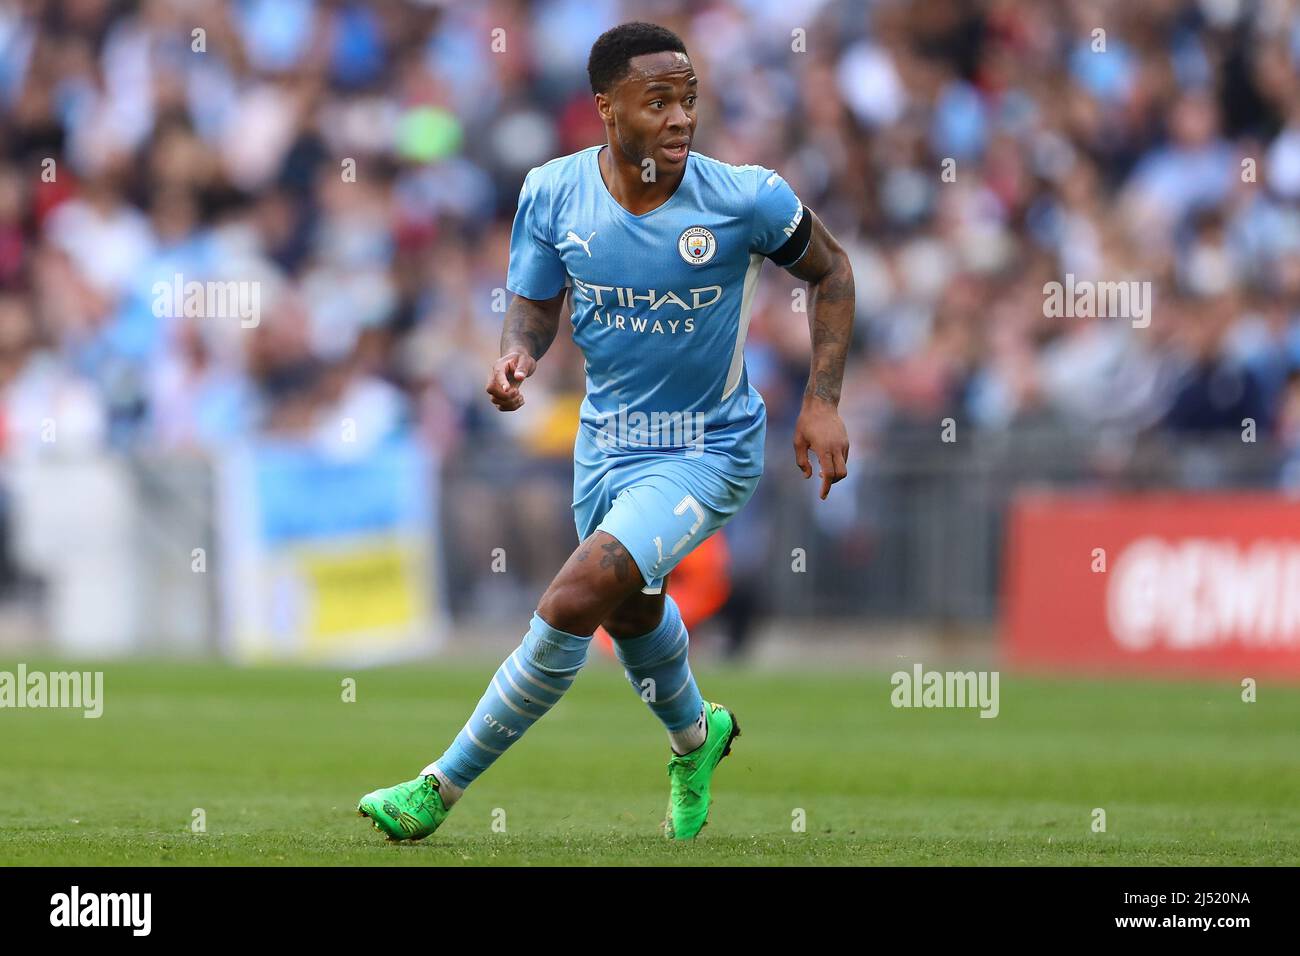 Raheem Sterling of Manchester City - Manchester City v Liverpool, The Emirates FA Cup Semi Final, Wembley Stadium, London - 16th April 2022  Editorial Use Only Stock Photo